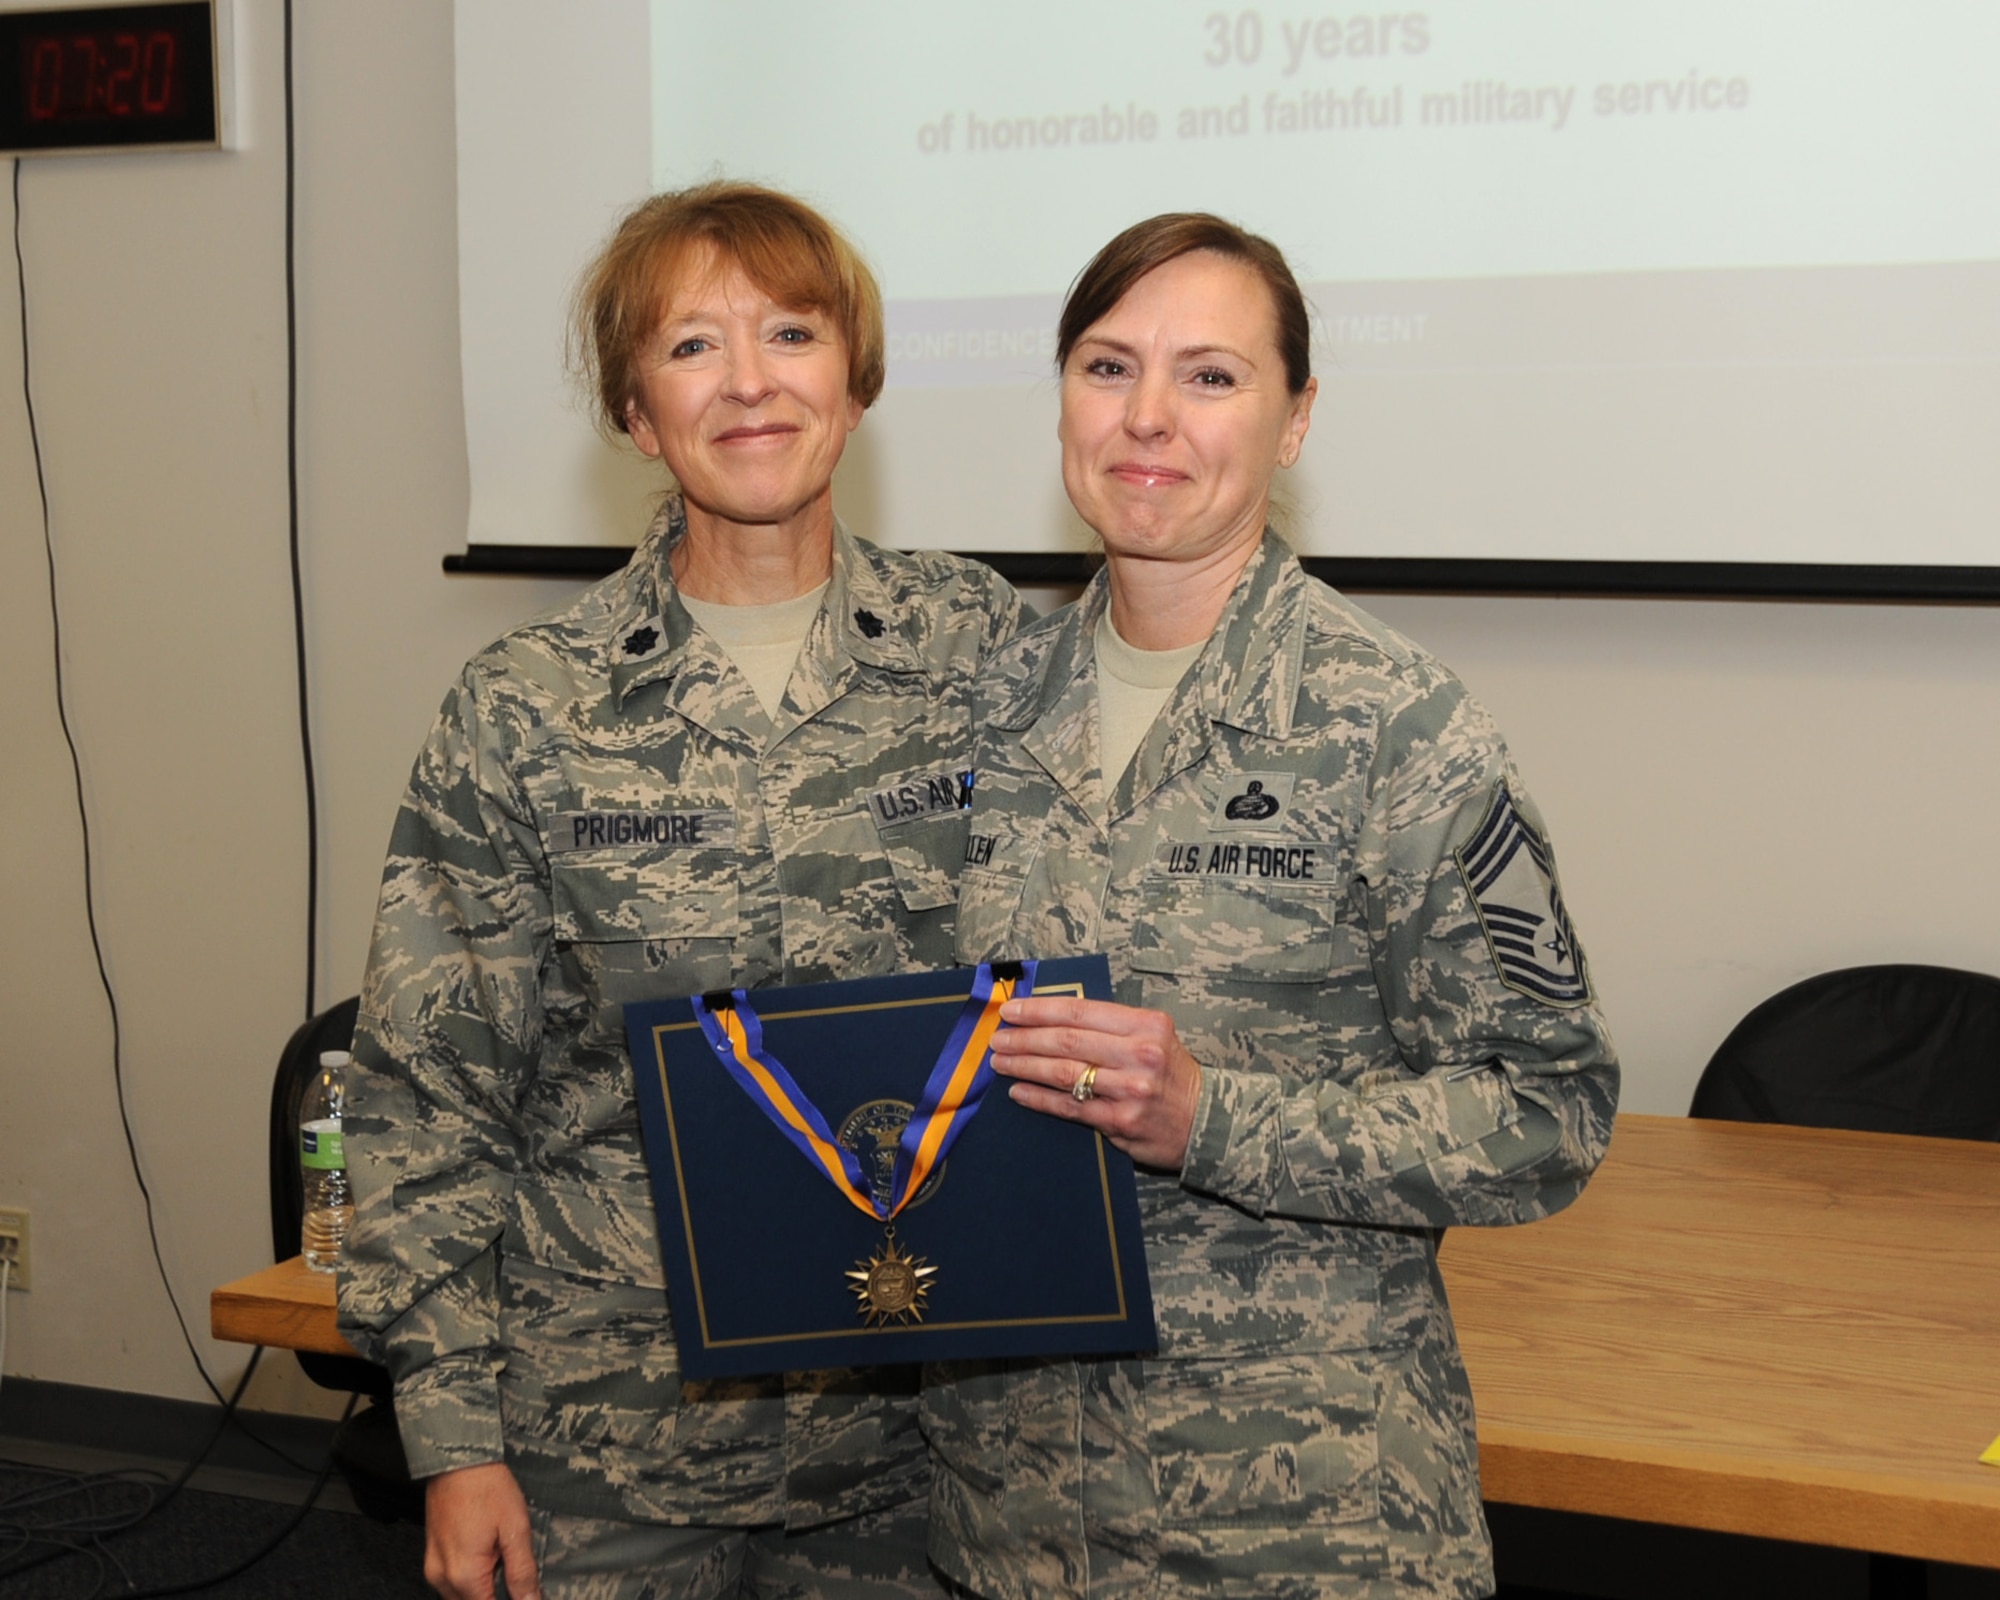 Chief Master Sgt. Jean Allen receives recognition for 30 years of dedicated service from the Commander of the 142nd Force Support Squadron, Col. Donna Prigmore, Portland Air National Guard Base, Ore., Nov. 2, 2013. (Air National Guard photo by Master Sgt. Shelly Davison, 142nd Fighter Wing Public Affairs)